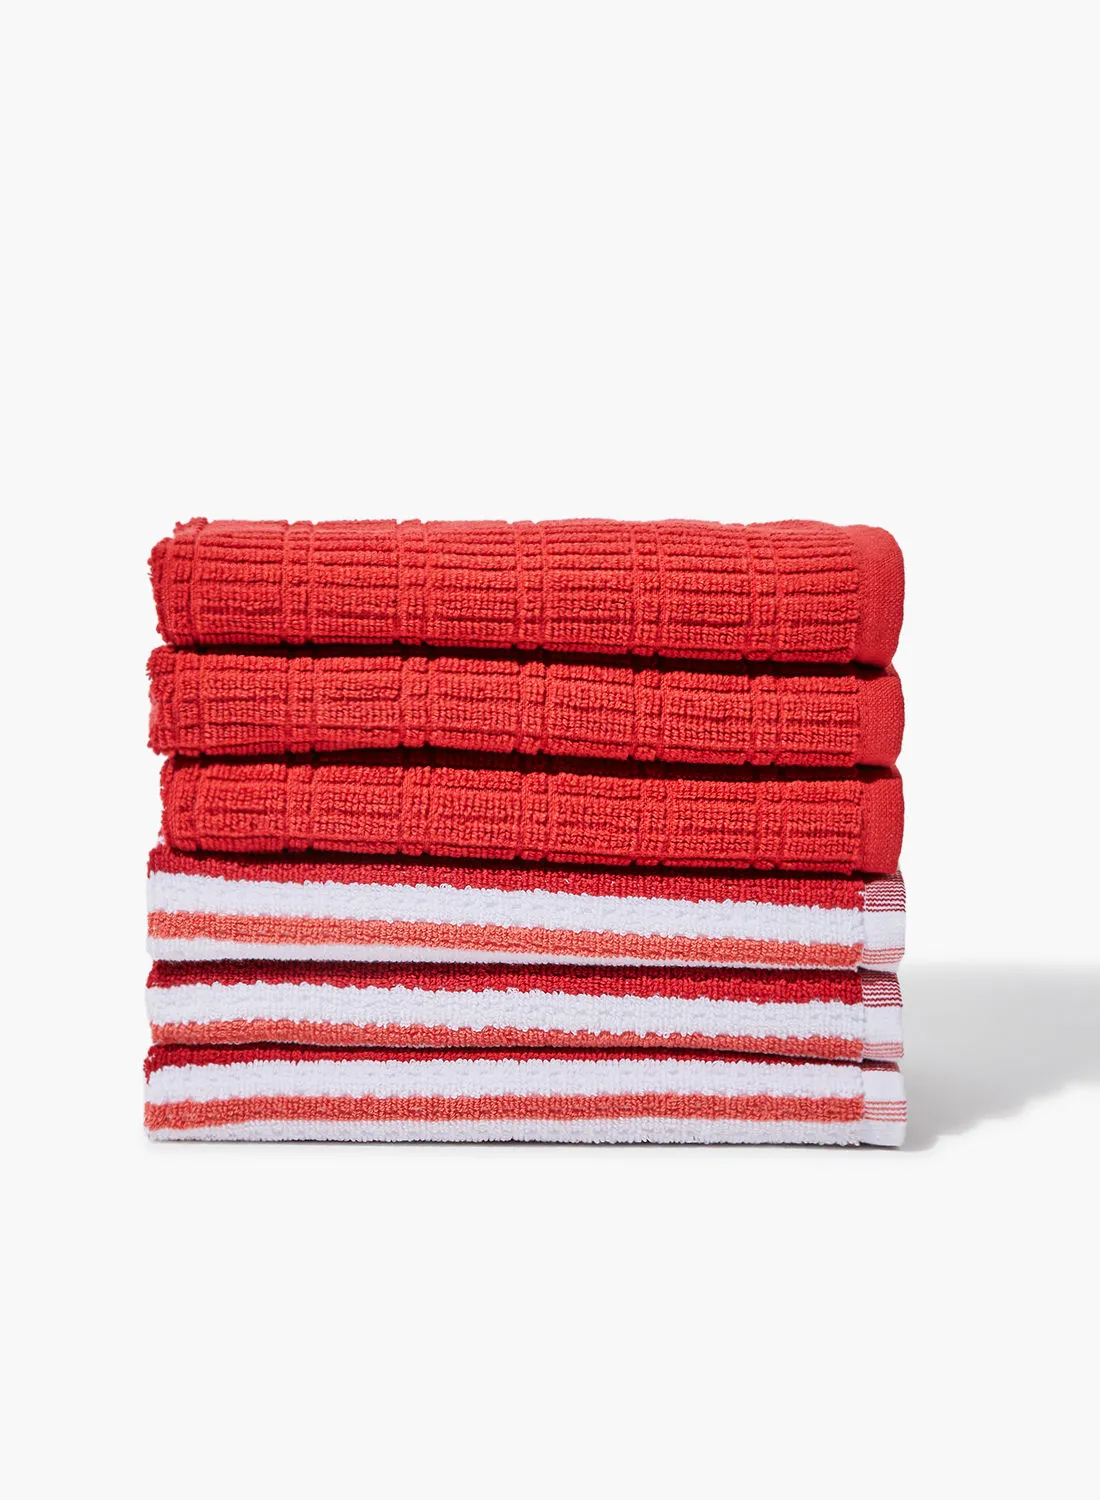 Amal 6 Pack Bathroom Towel Set - 393 GSM 100% Cotton Solid And Yarn Dyed - Multicolor Red/White Color -Quick Dry - Super Absorbent